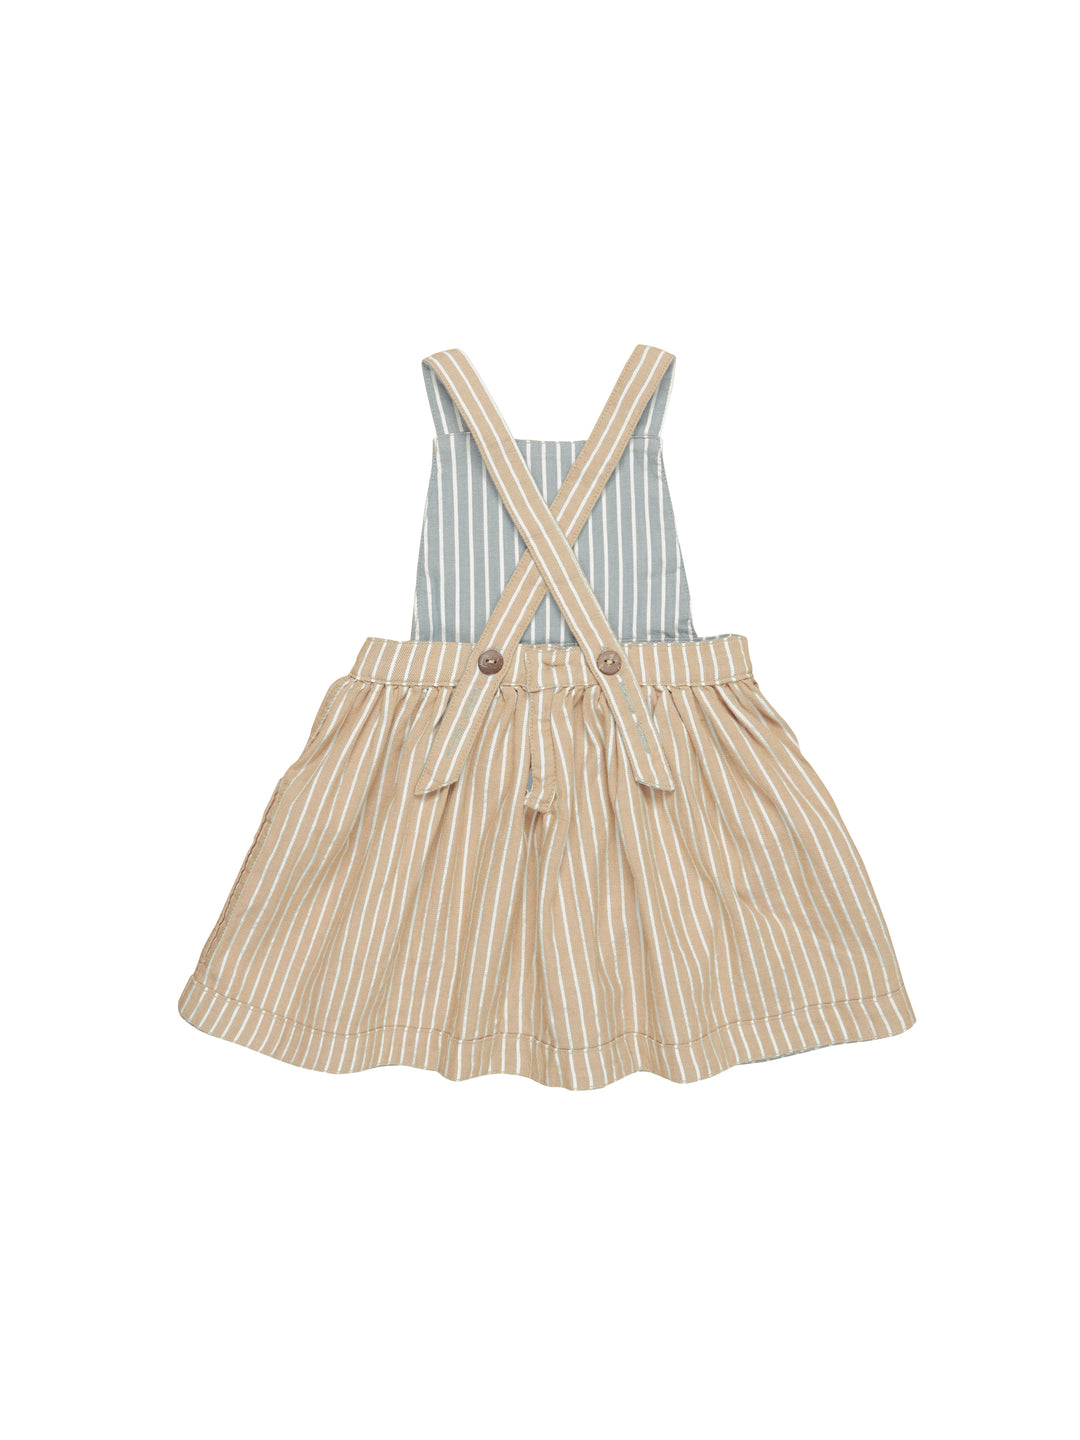 Huxbaby Stripe Reversible Pinafore - Teal + Biscuit